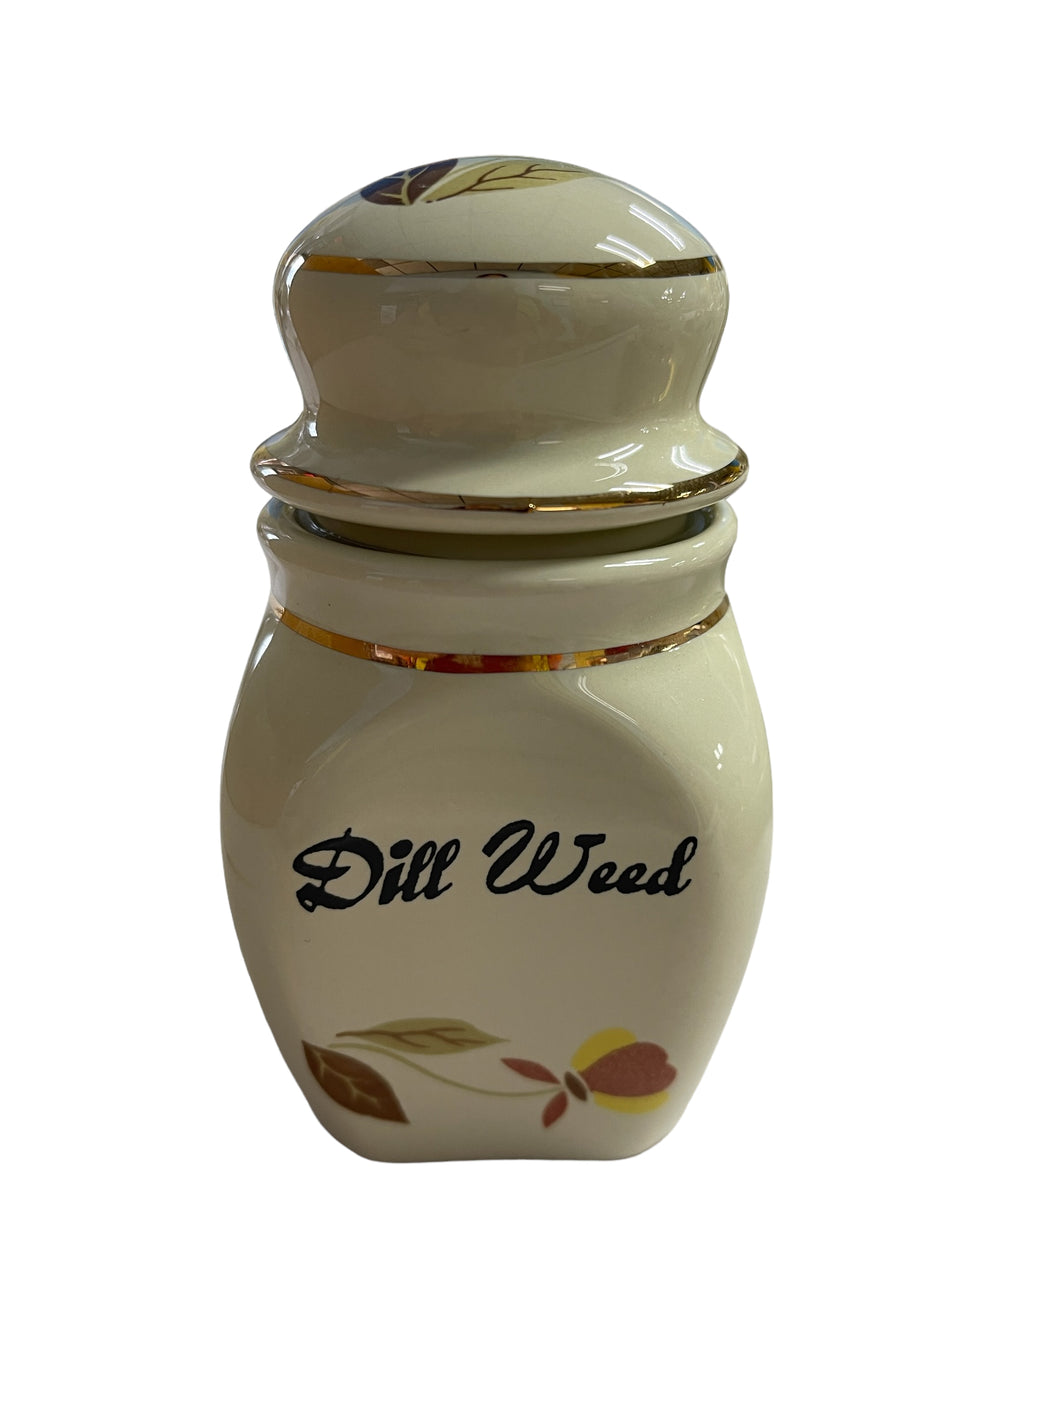 China Specialties Autumn Leaf Spice Jar Dill Weed